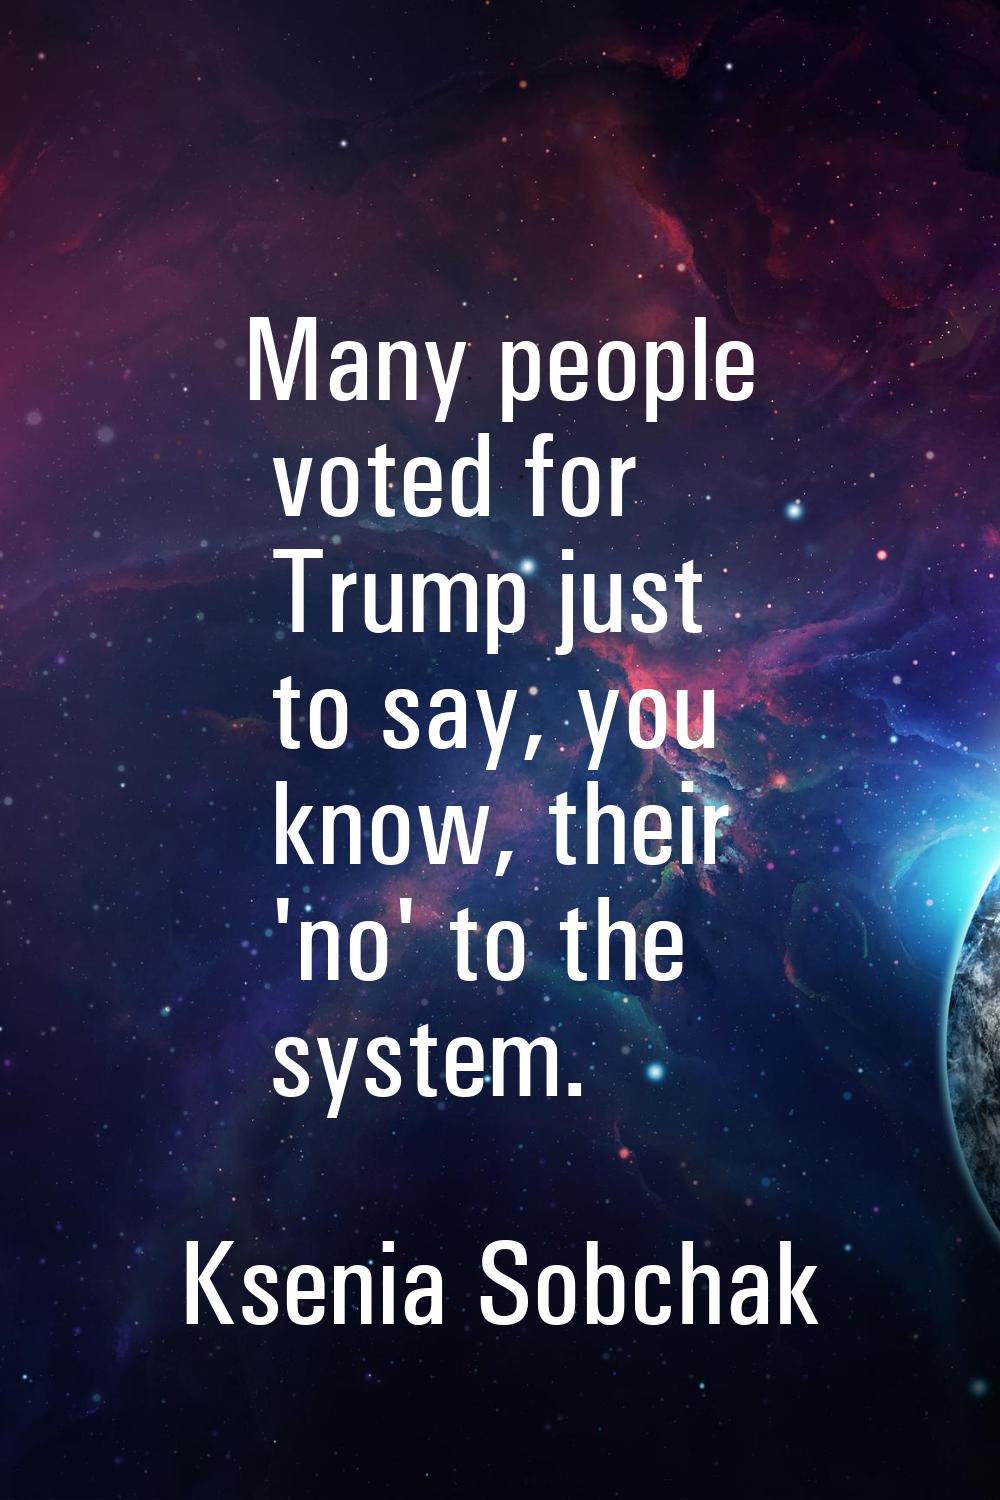 Many people voted for Trump just to say, you know, their 'no' to the system.